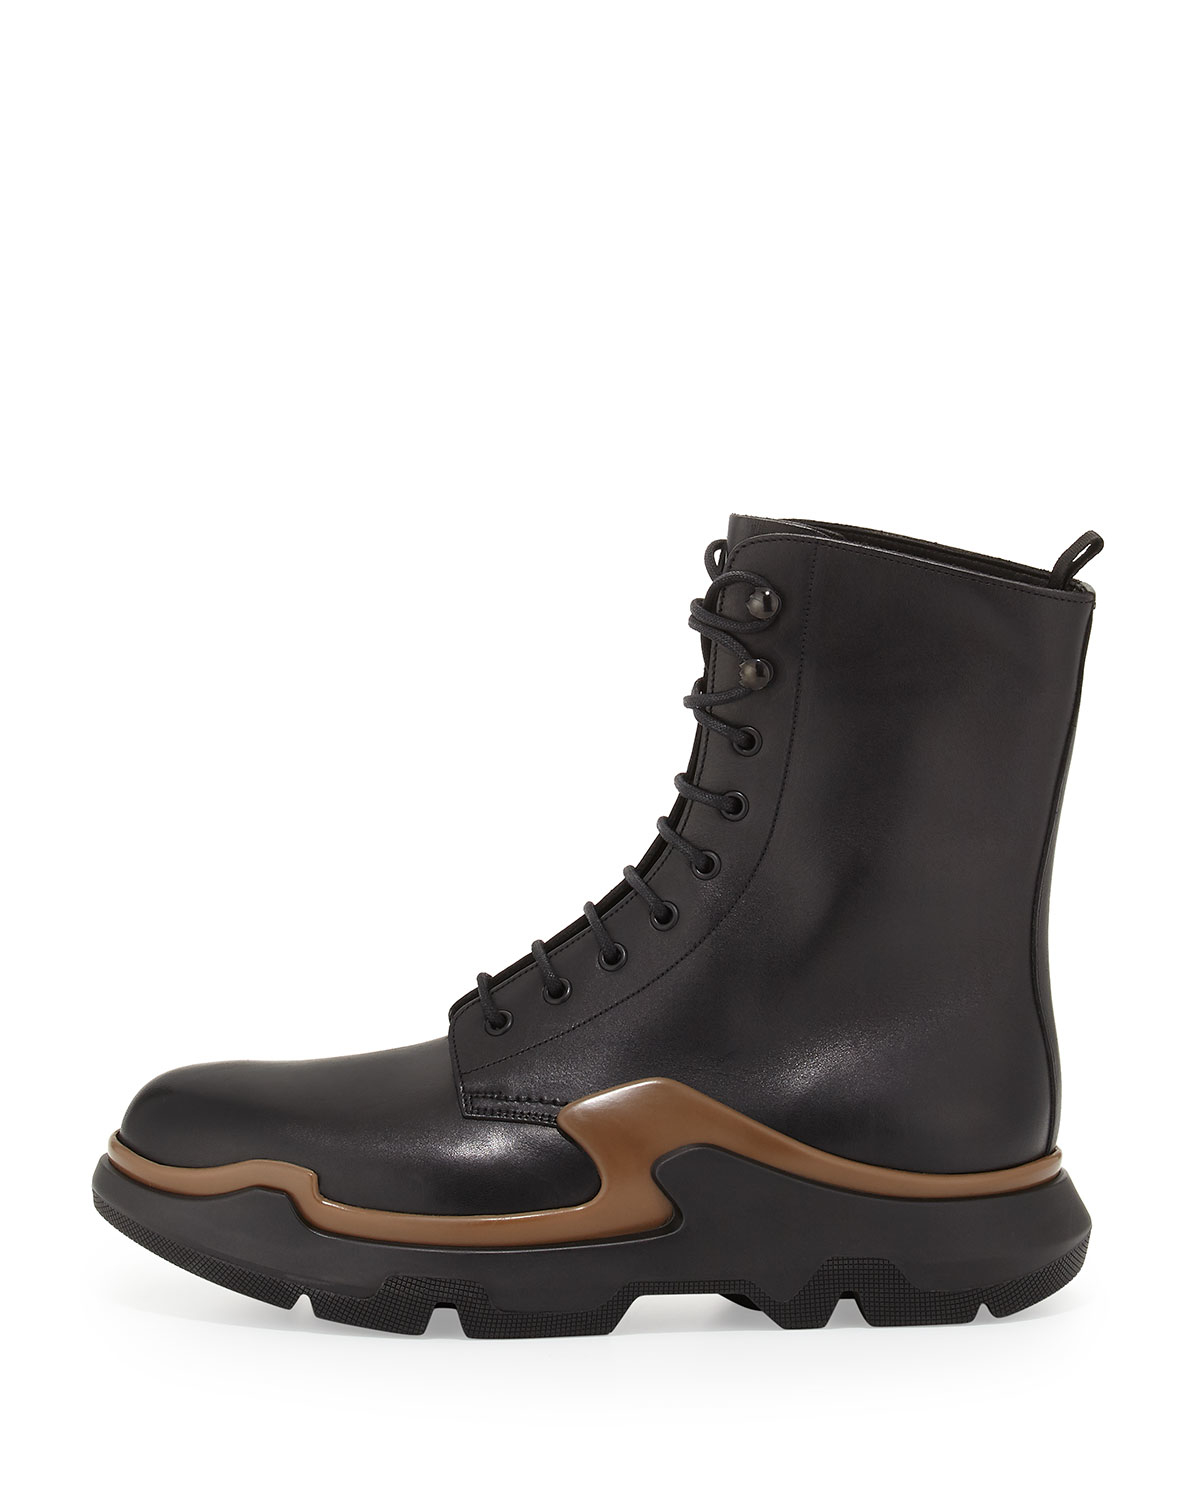 Lyst - Prada Runway Lace-up Leather Boots in Black